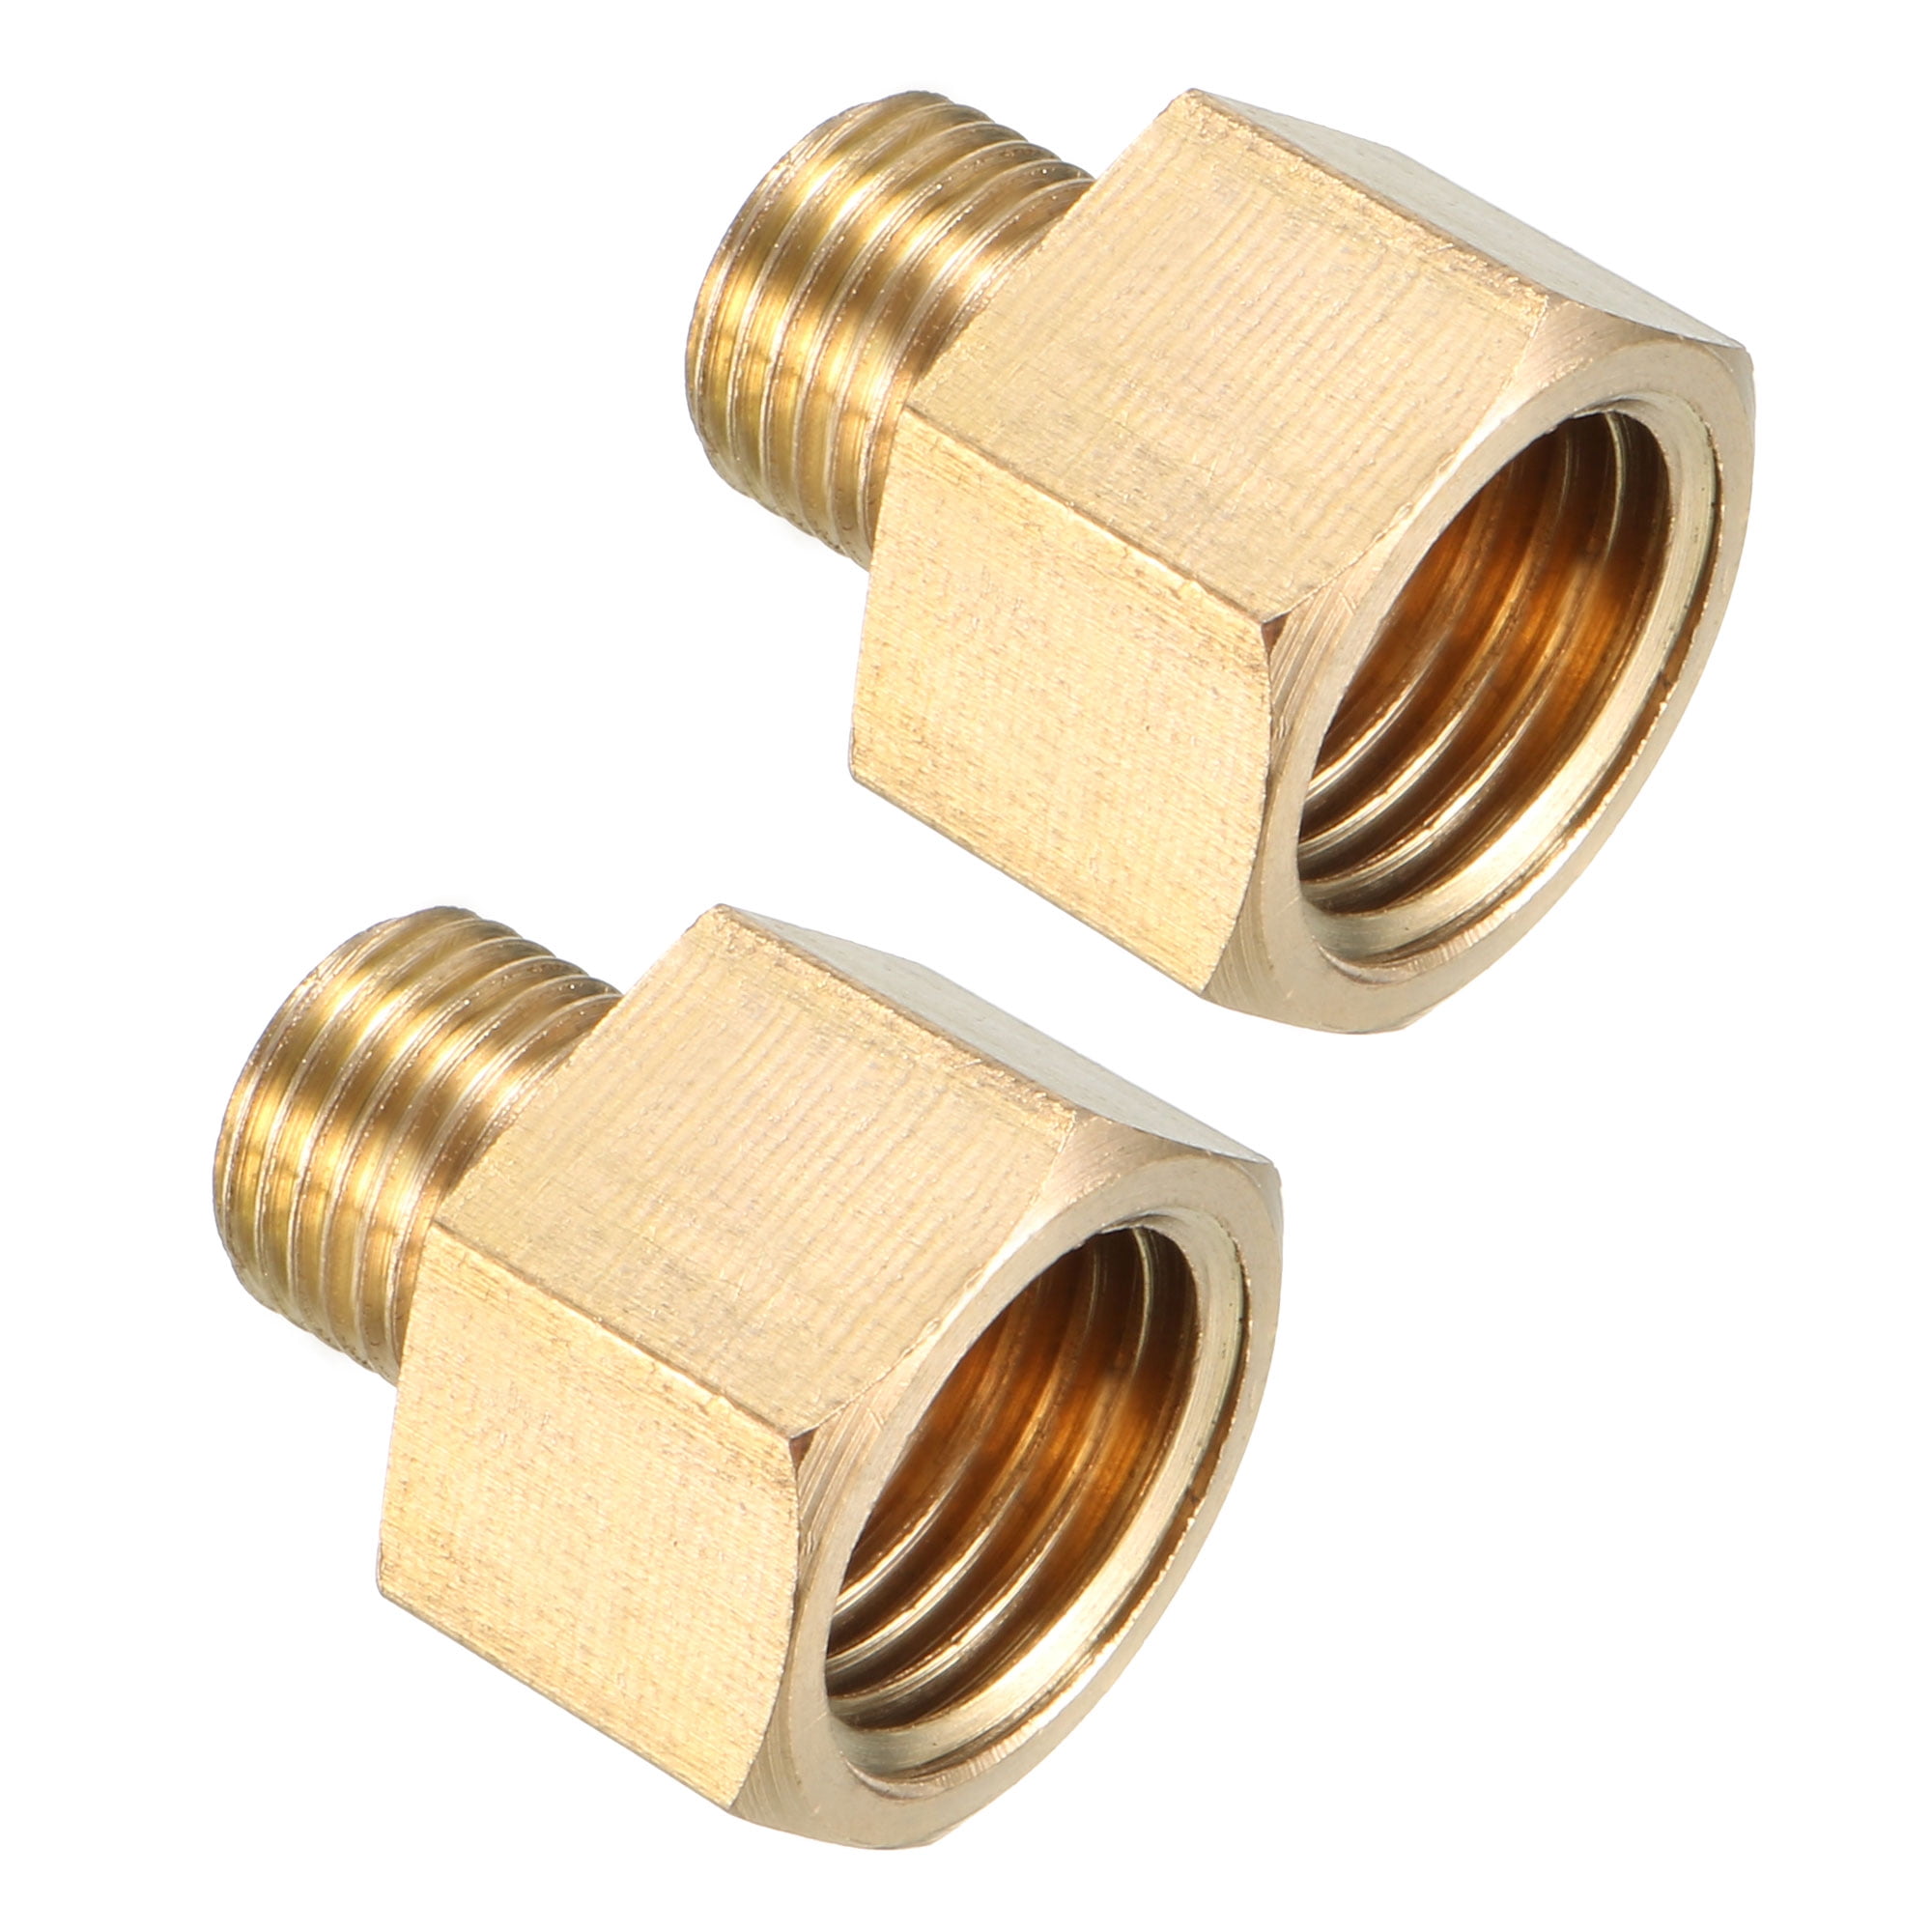 Screw 1/4PT Air Line Hose Fittings Double Headed Connector Adapter Accessories 